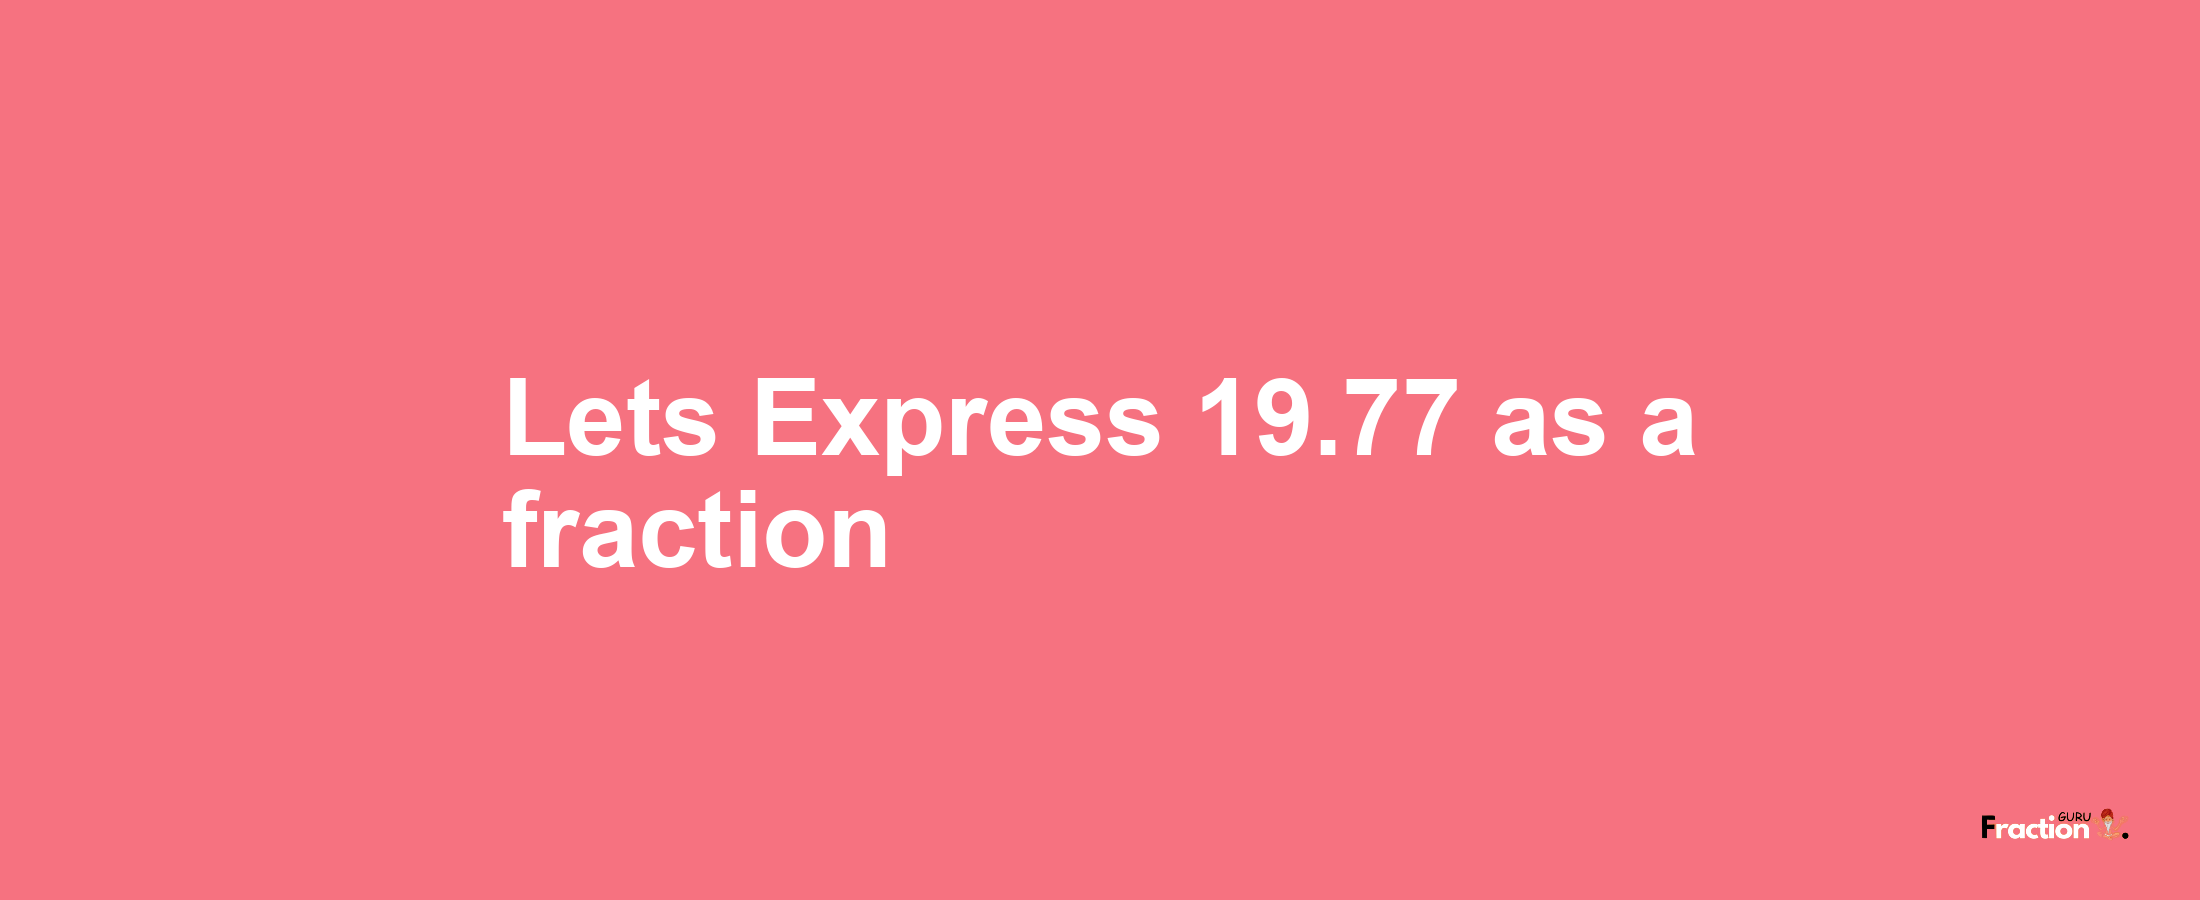 Lets Express 19.77 as afraction